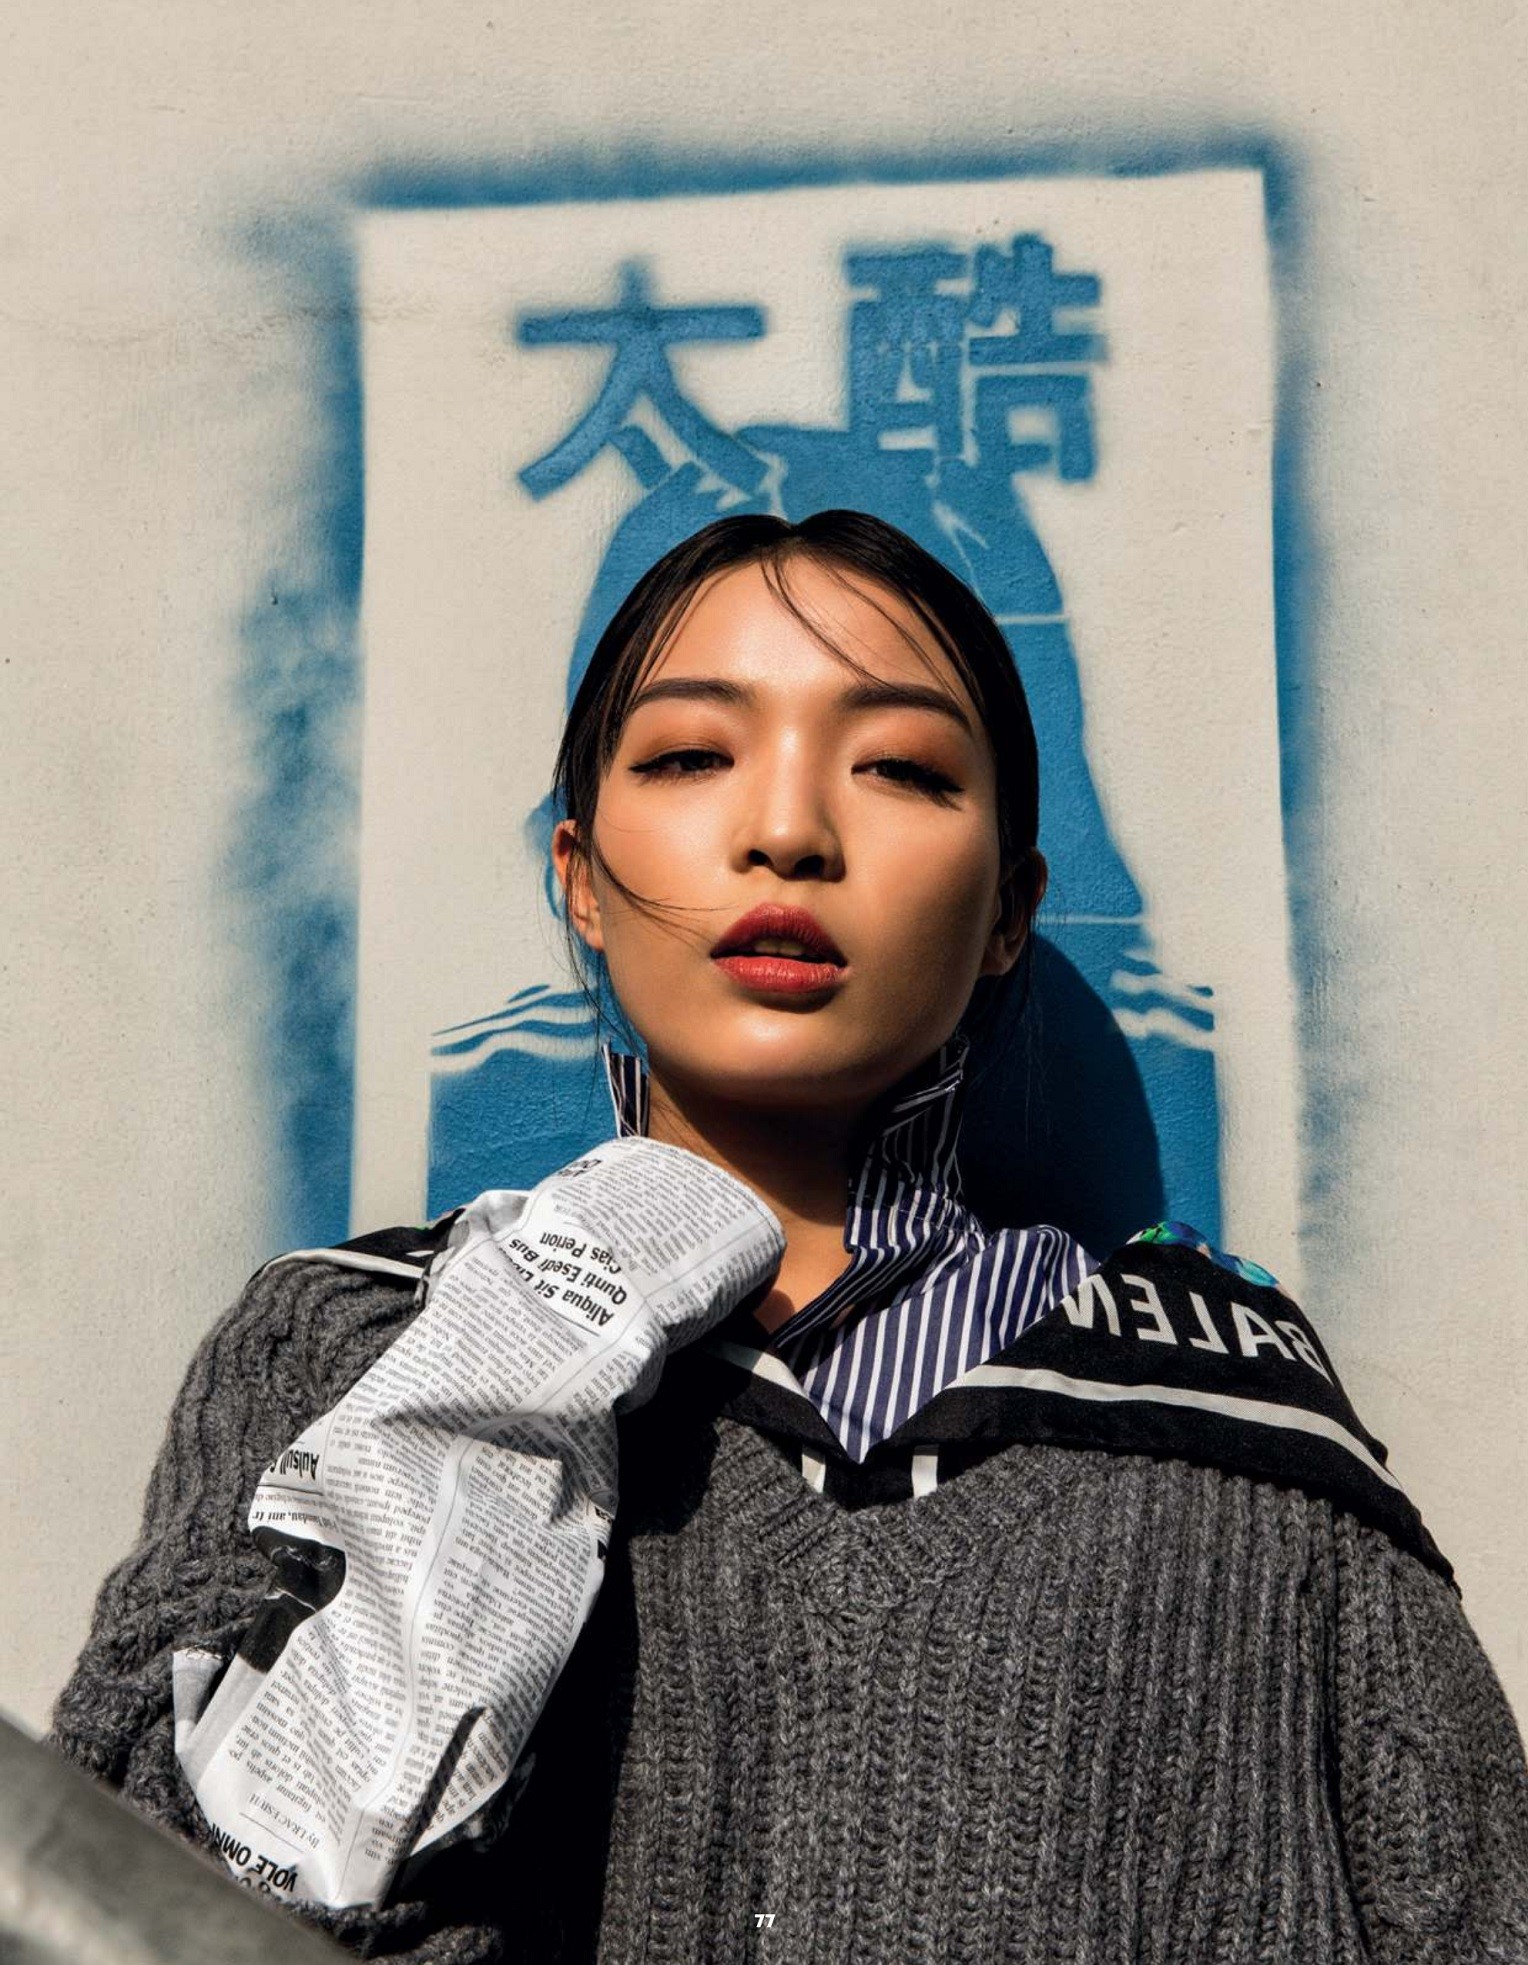 Chinese rapper Vava used her Instagram account to show her support for the police in Hong Kong. Photo: Ronald Leong/Esquire Singapore